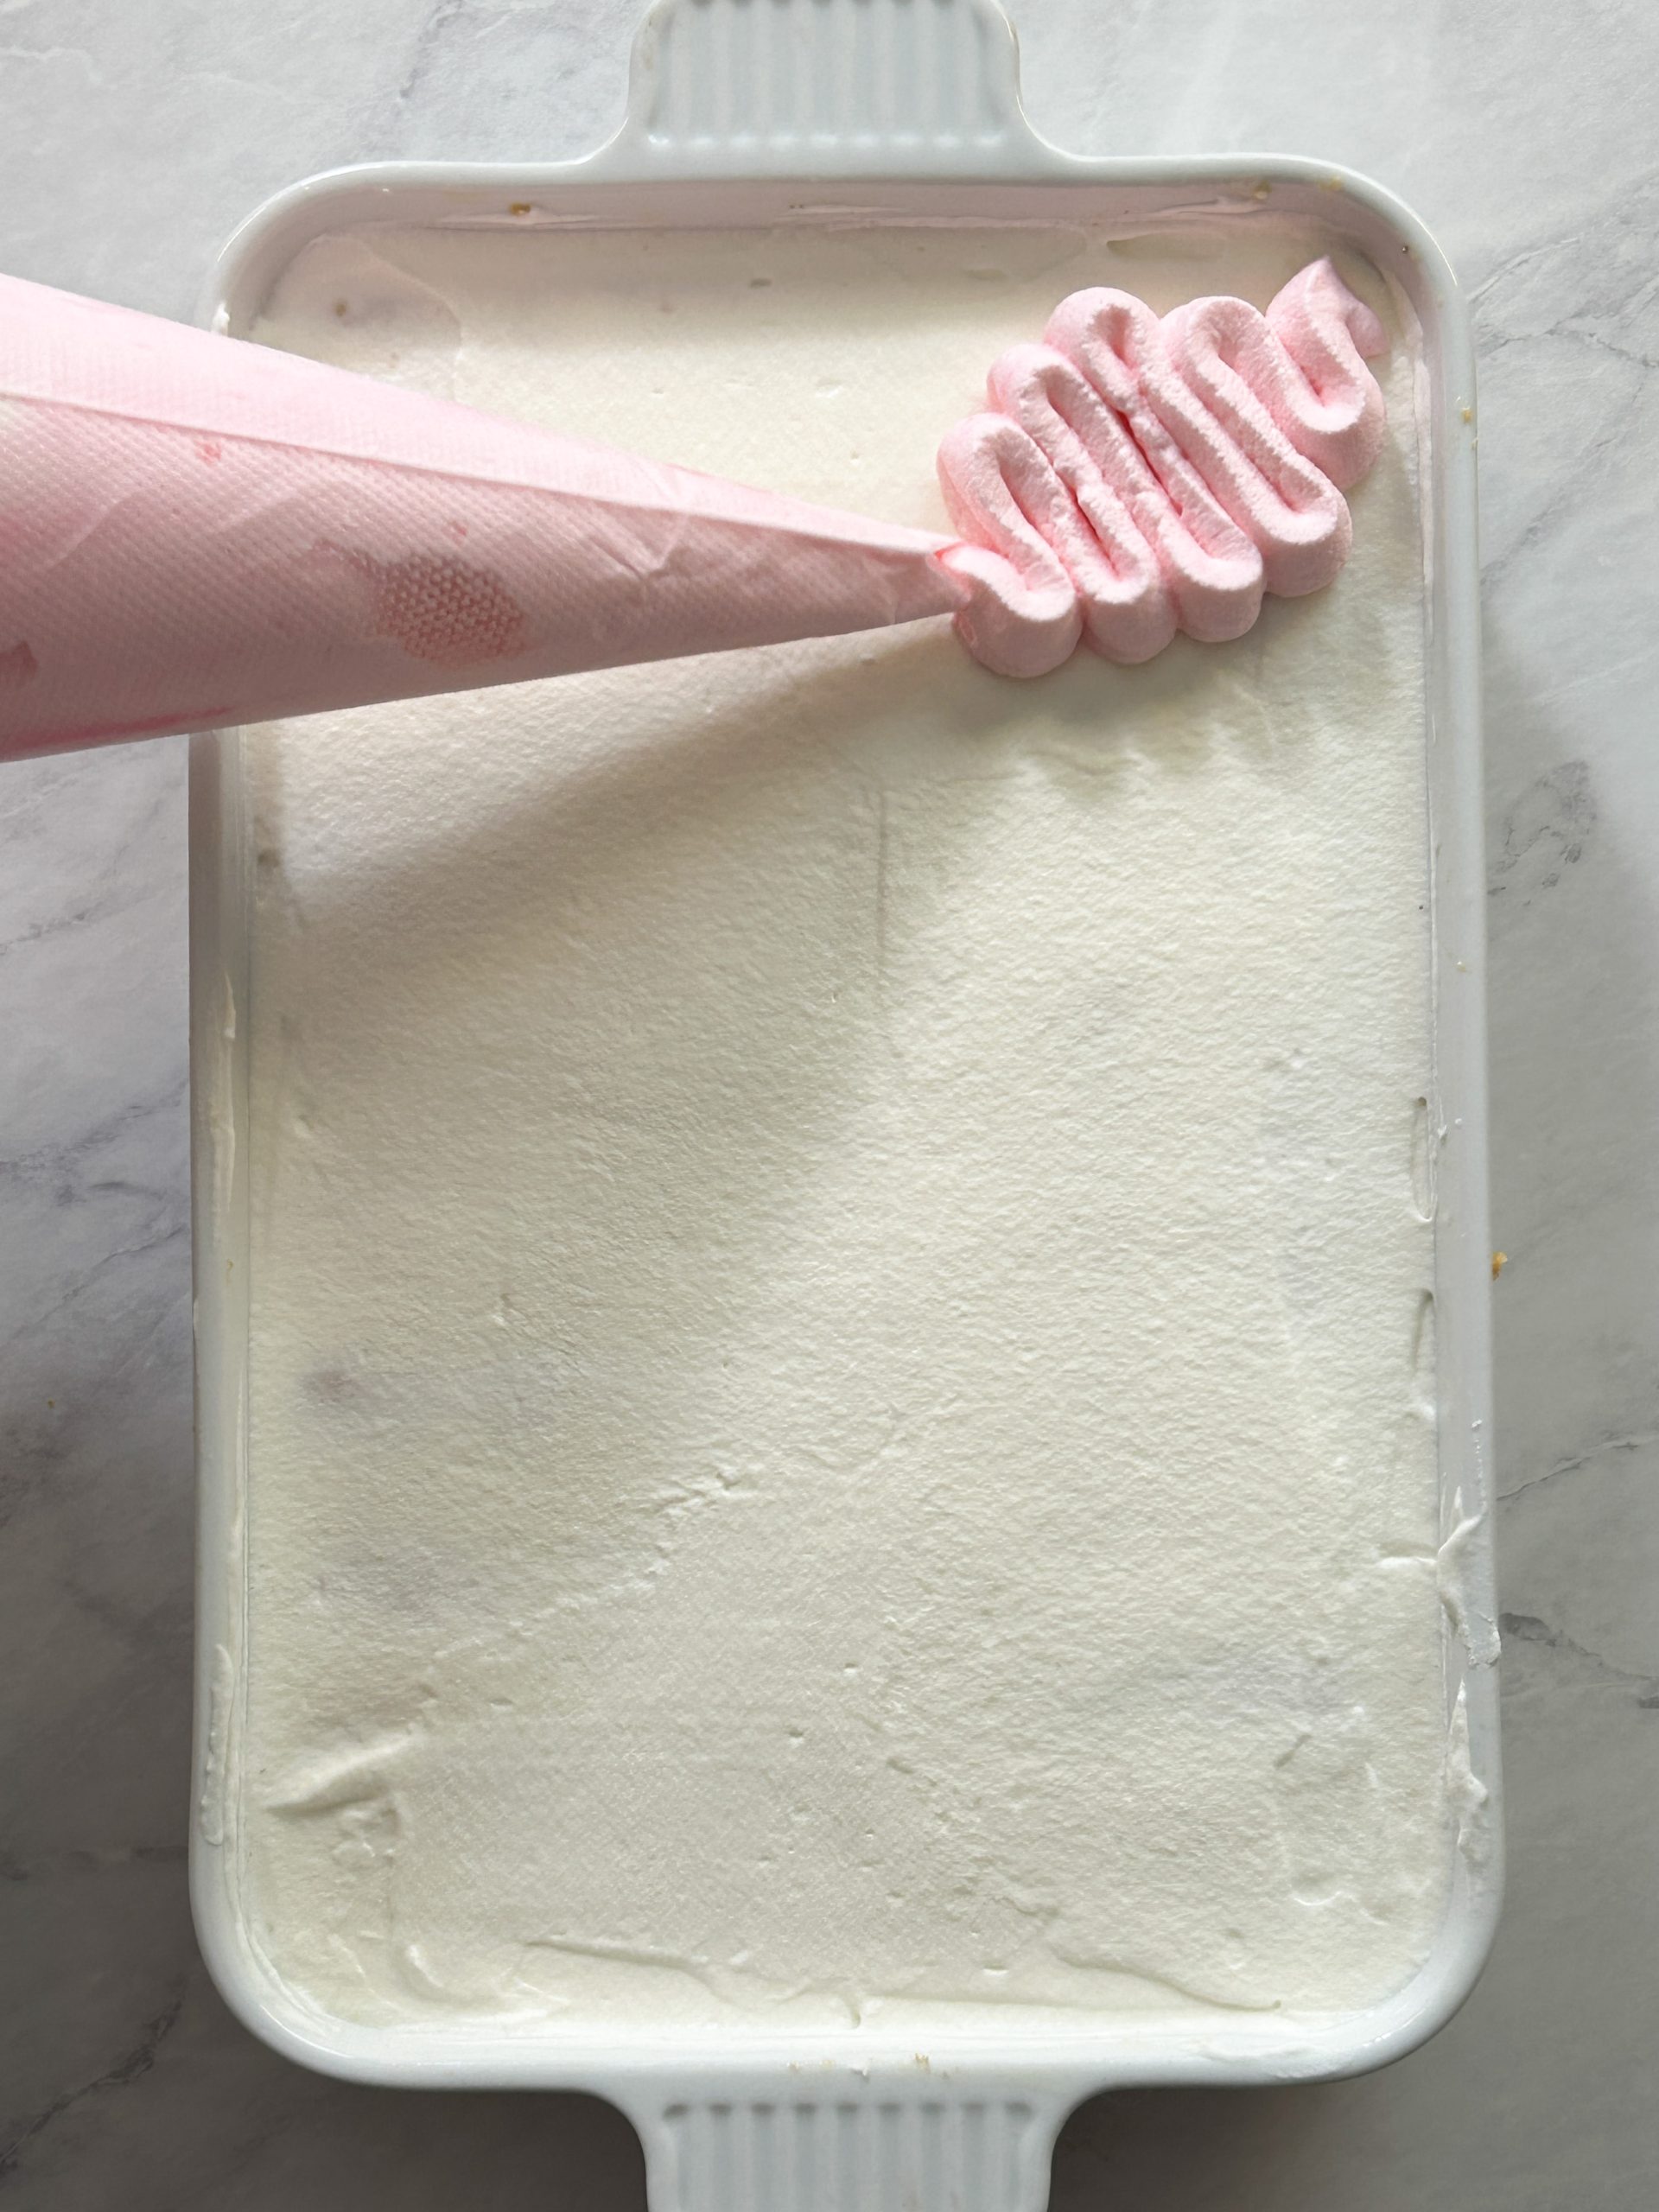 piping bag with pink whipped cream is piping a swirl onto tres leches cake